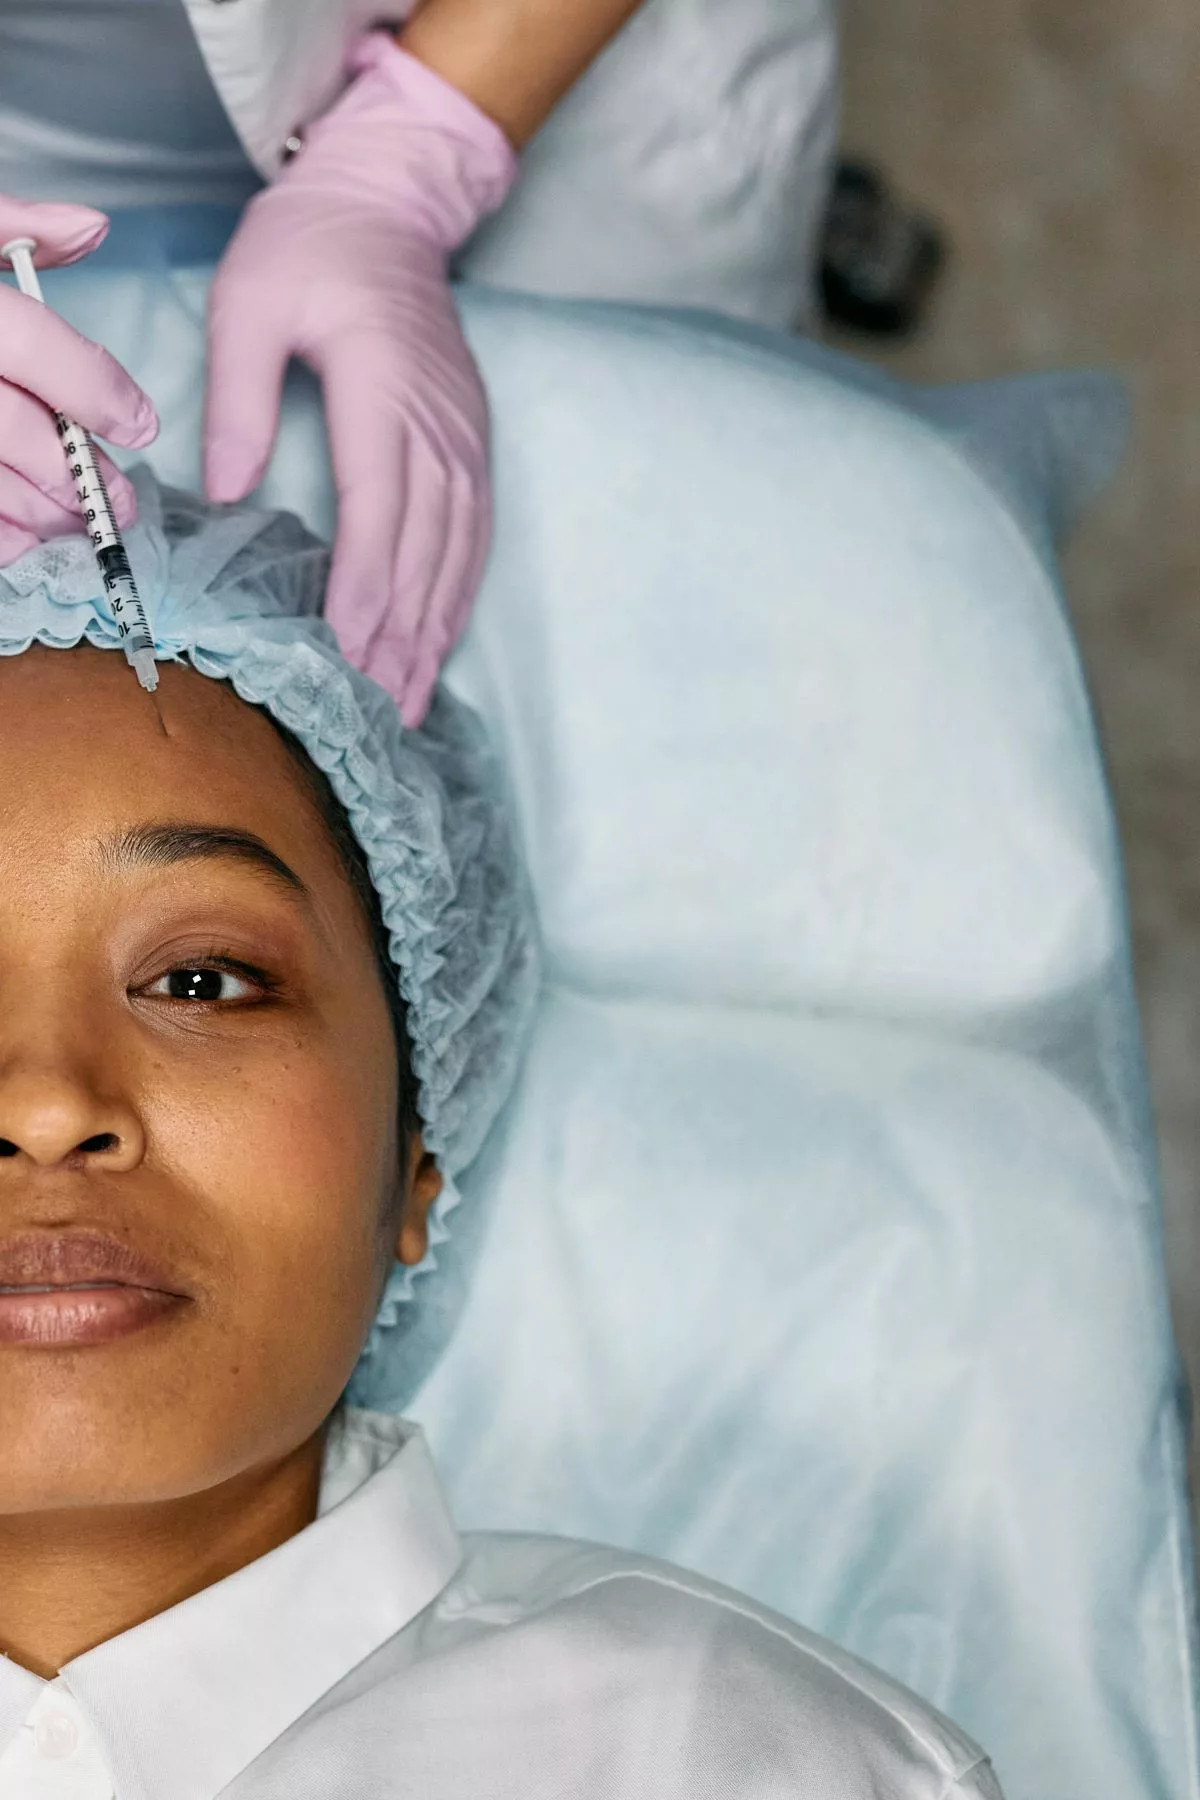 The Art of Botox Choosing the Right Provider for Your Injections